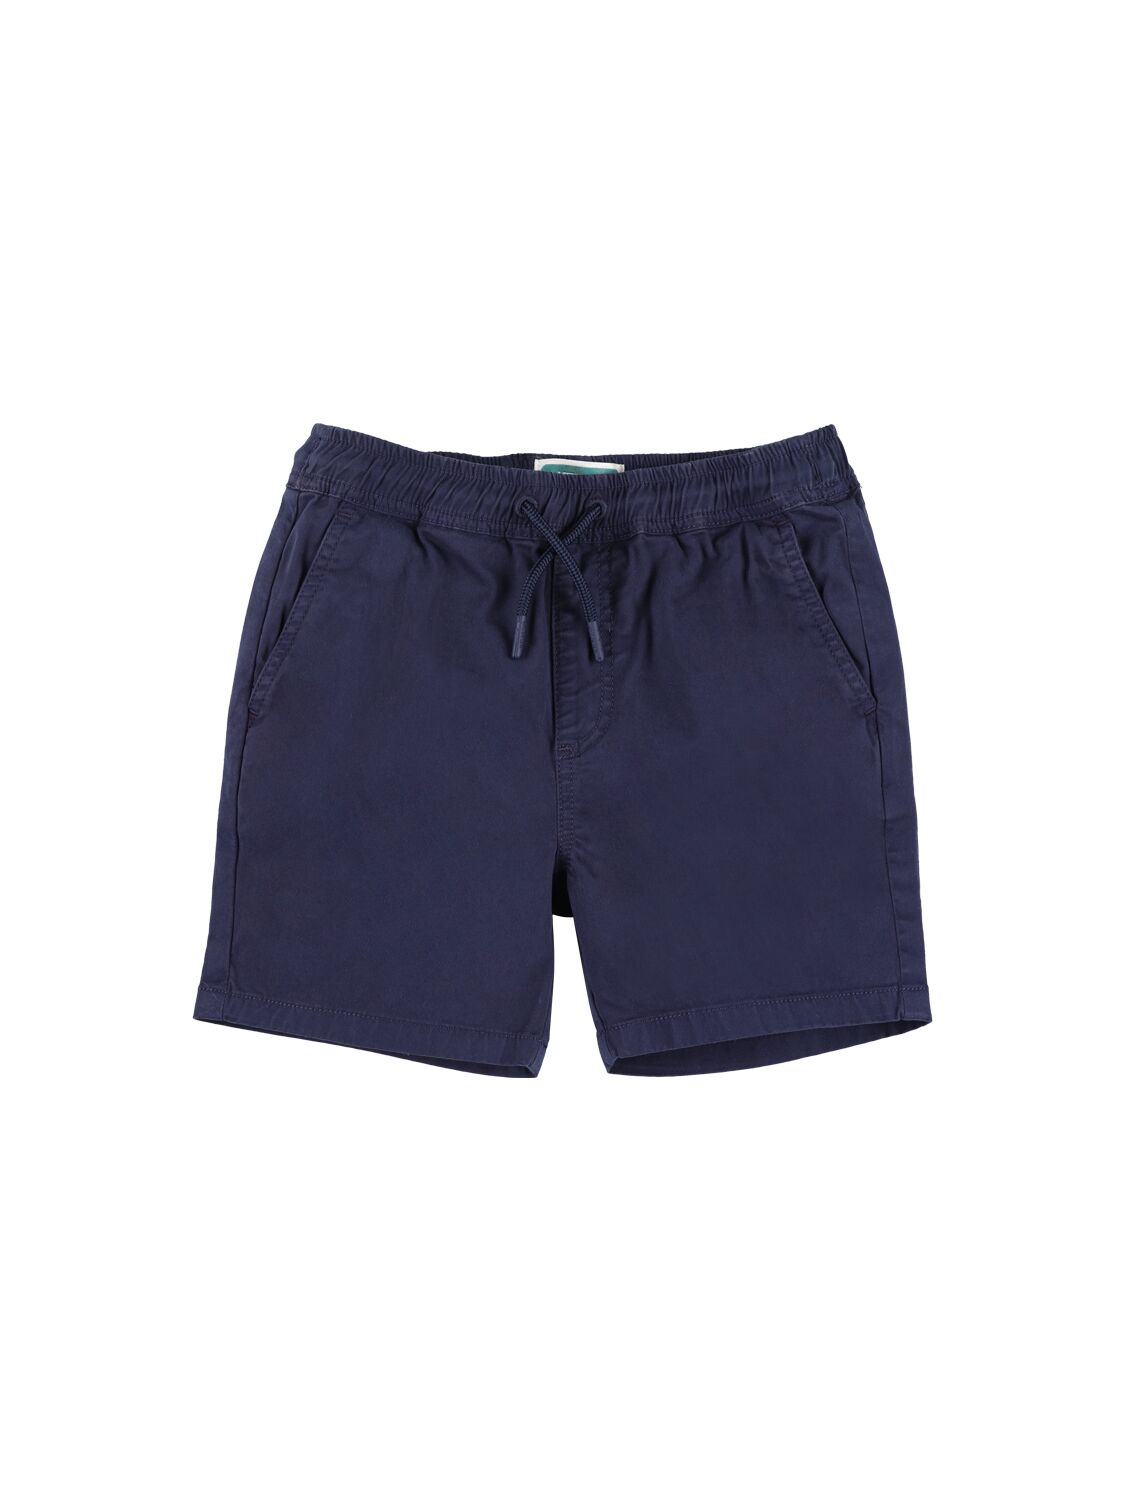 Image of Cotton Blend Twill Shorts